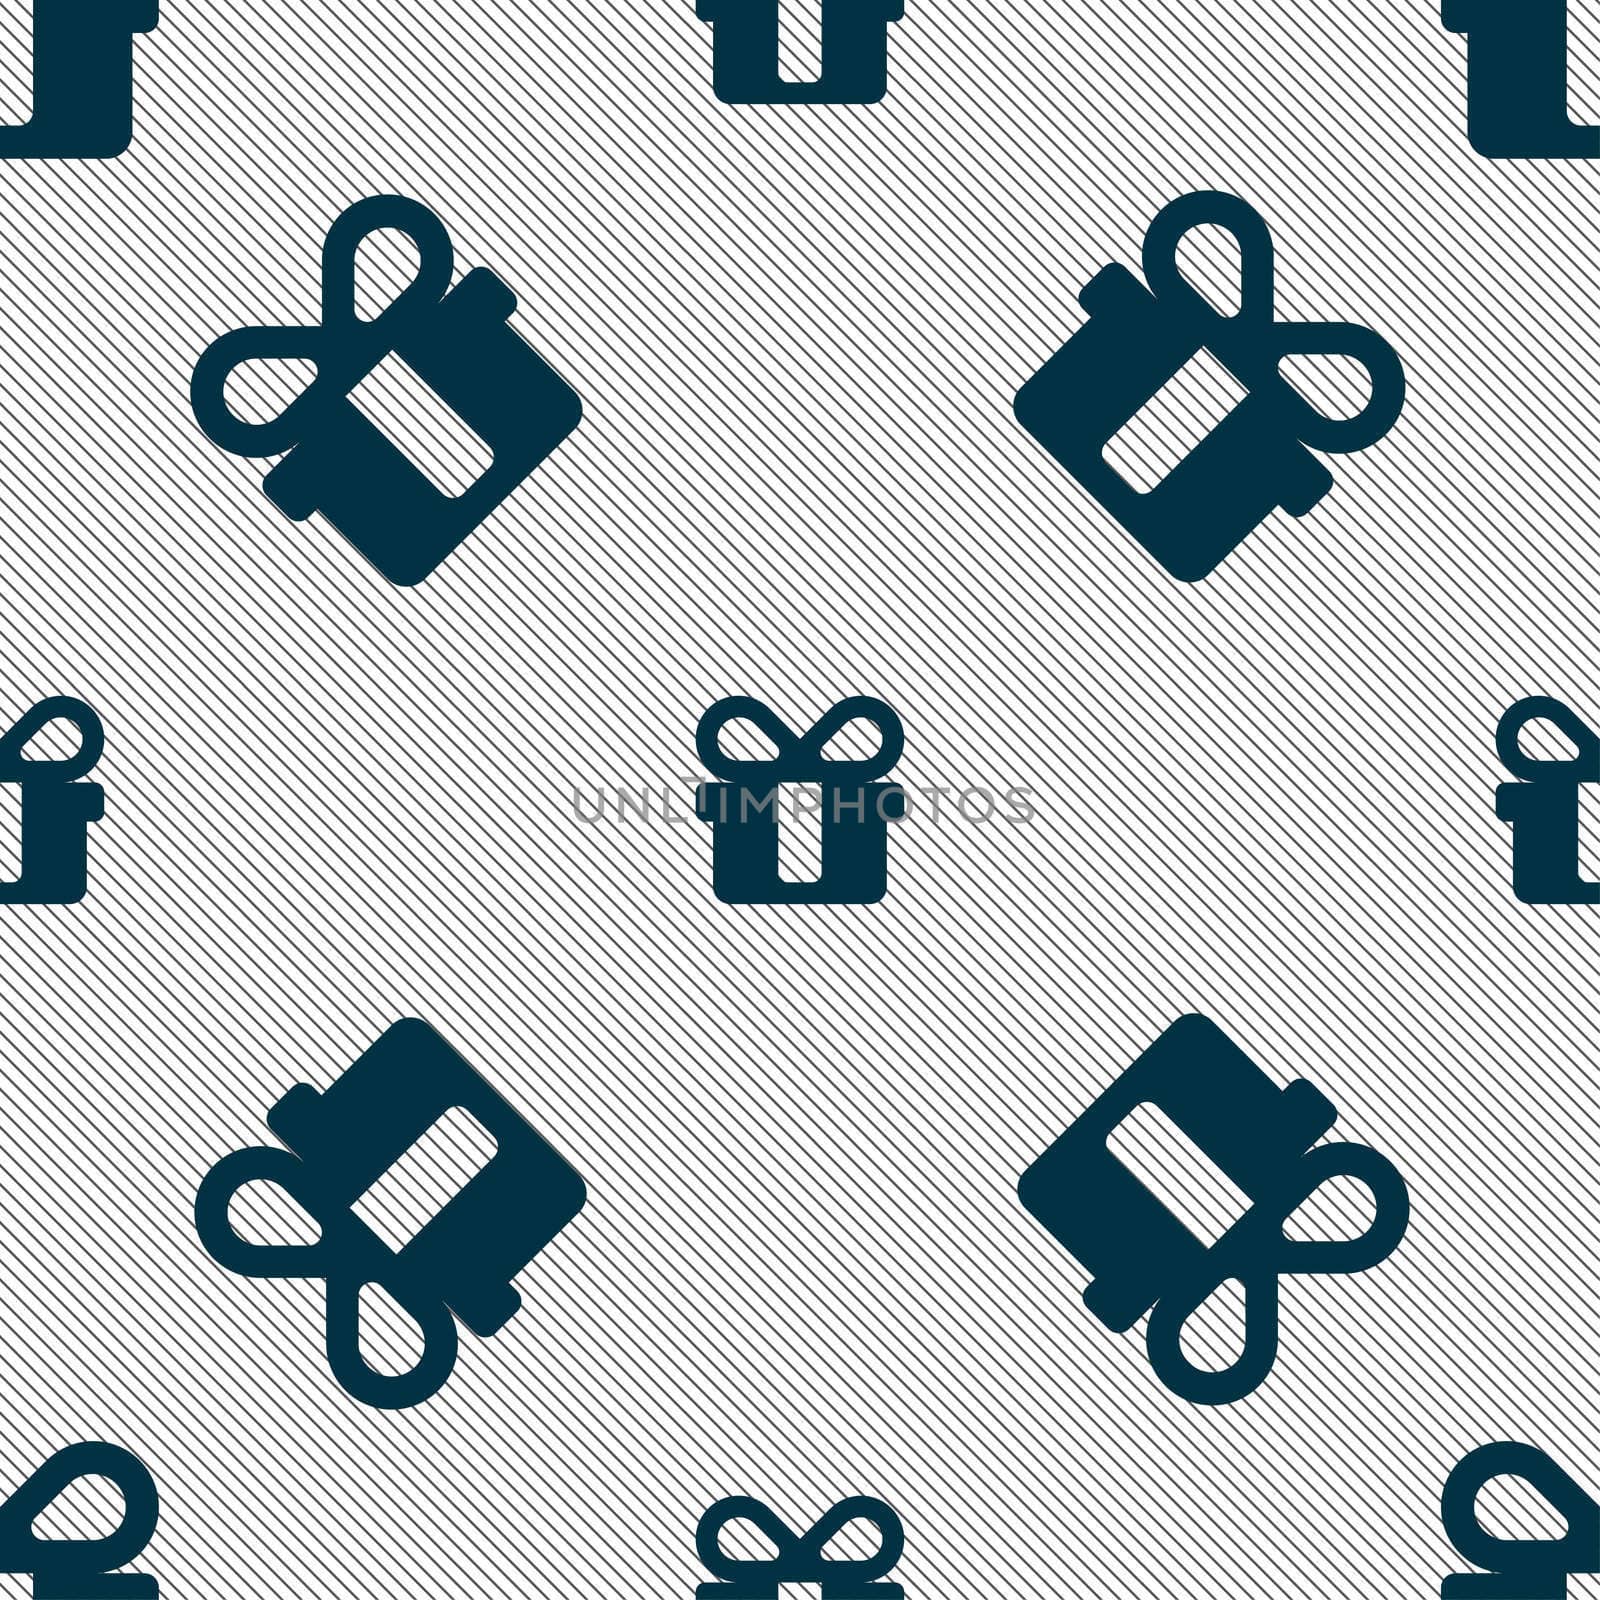 gift icon sign. Seamless pattern with geometric texture. illustration